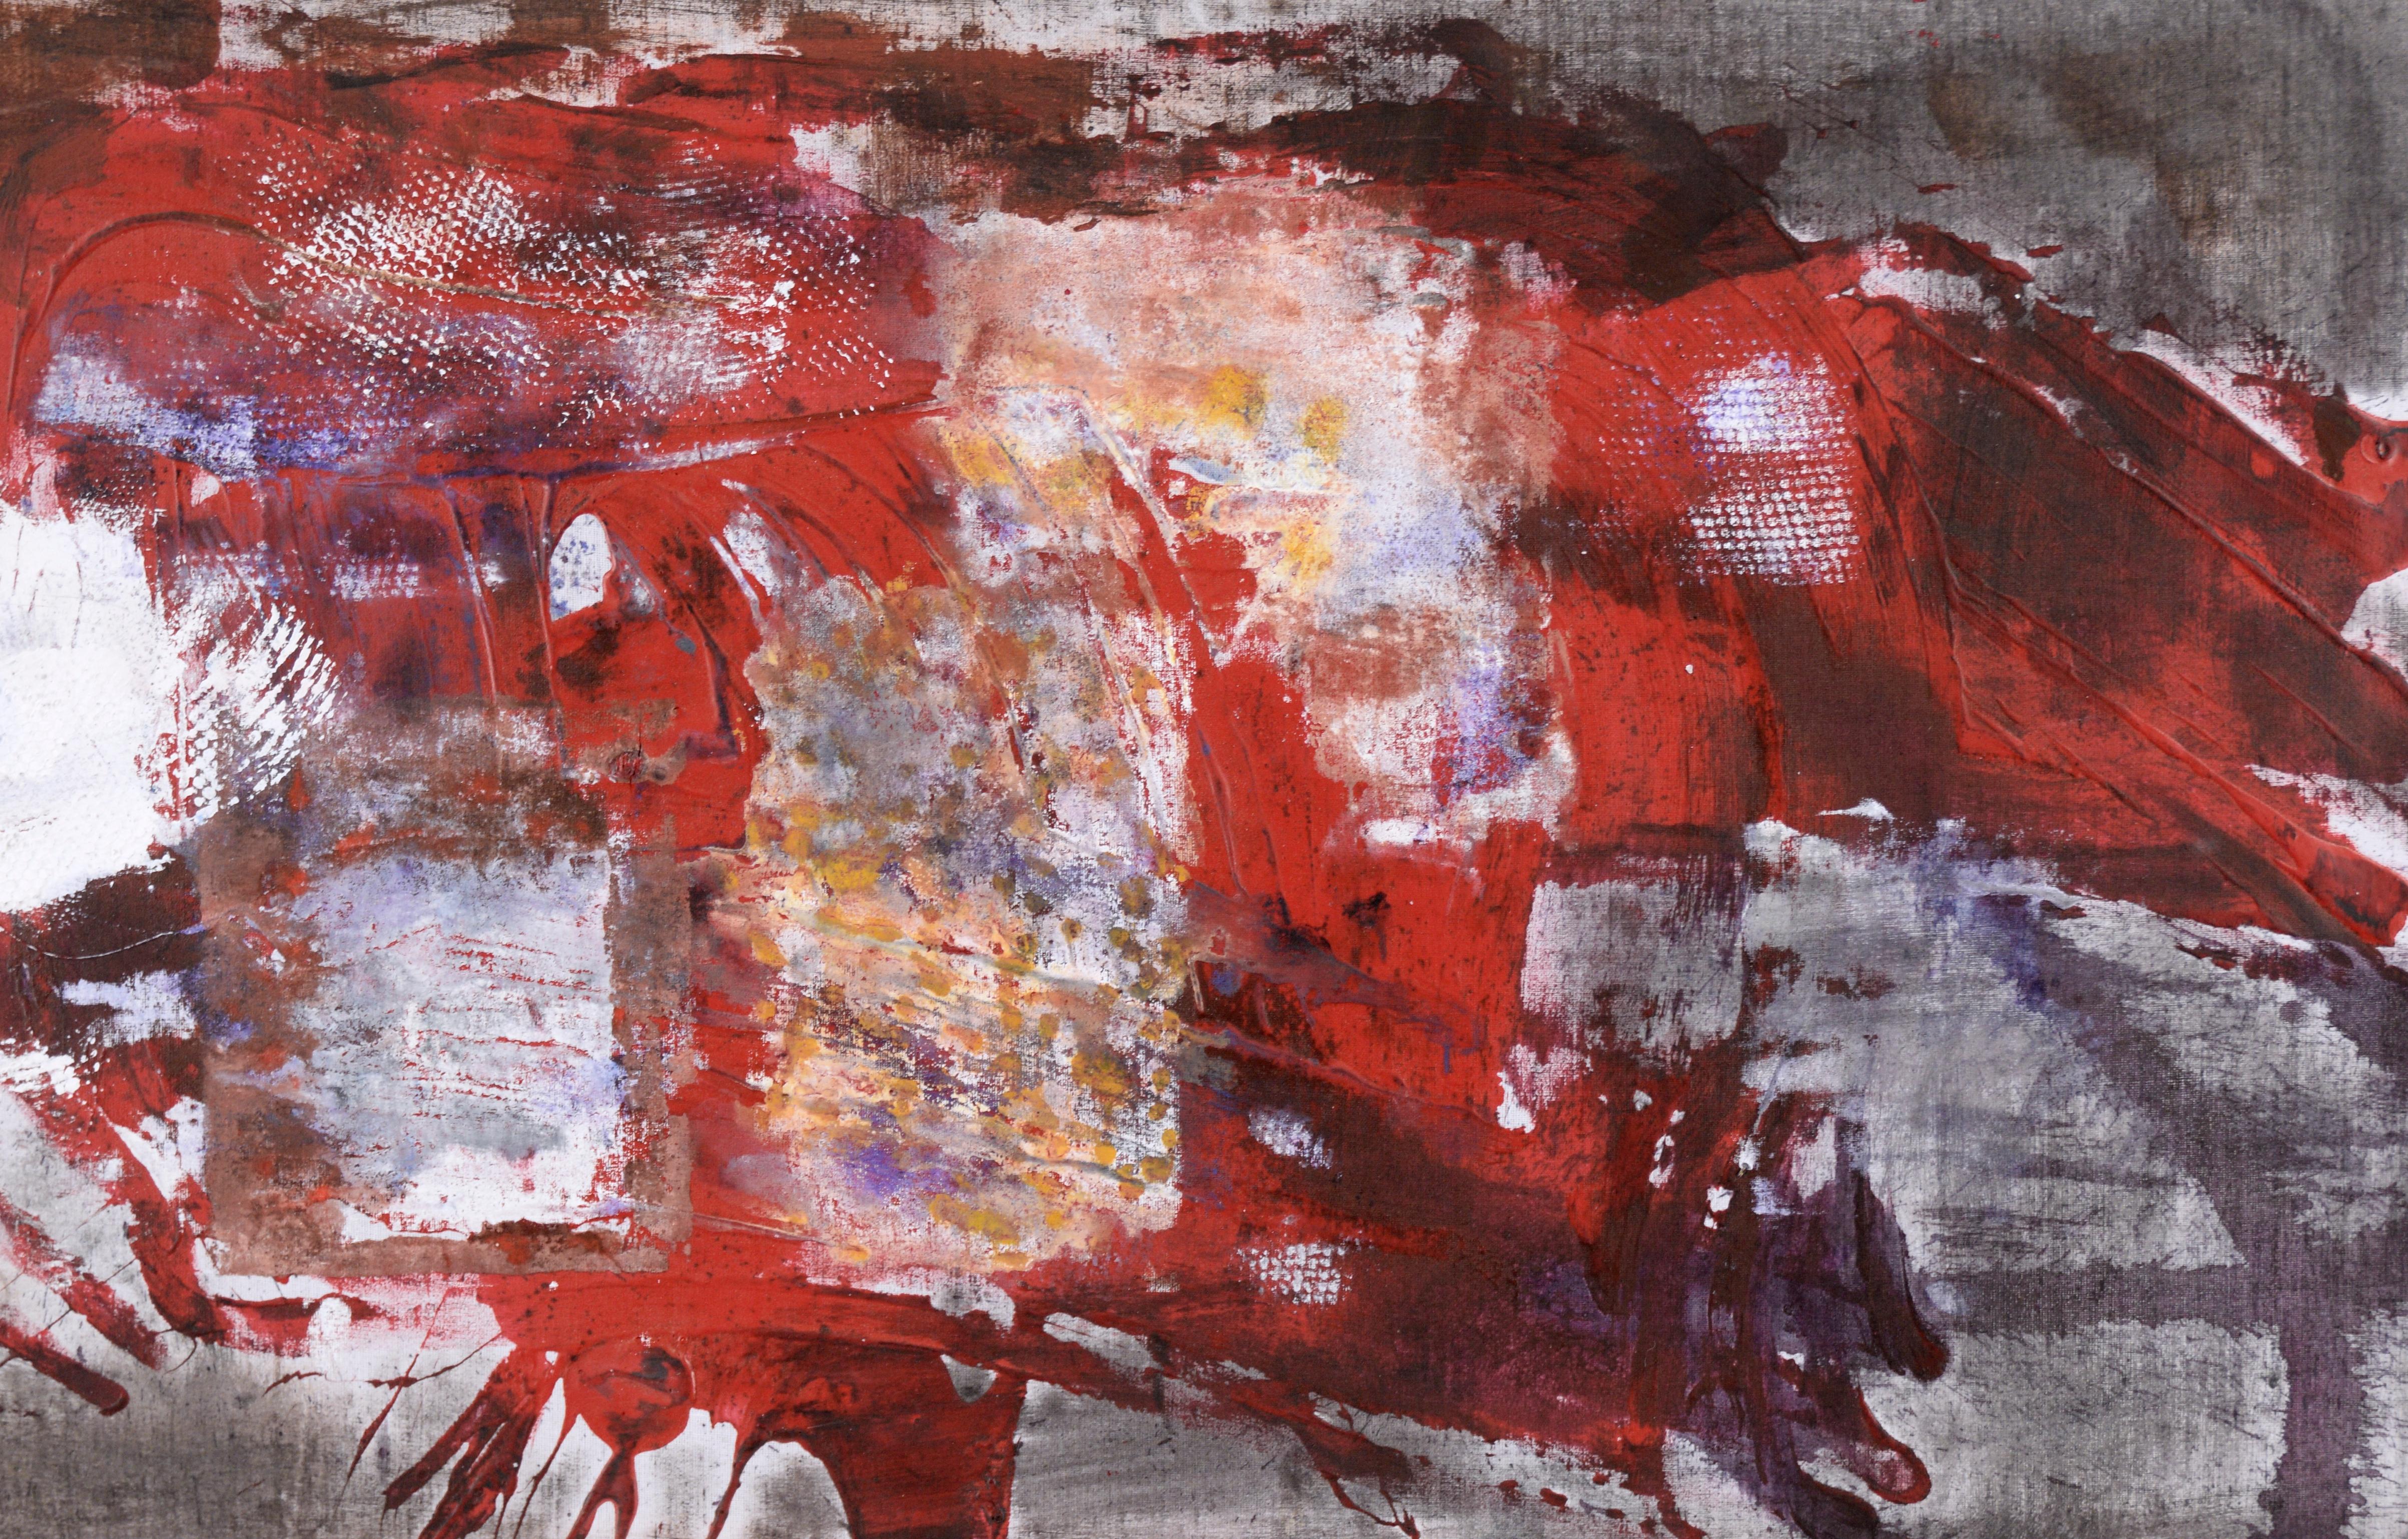 Bold abstract expressionist composition by D. Whelan (American, 20th Century). The base layer of this piece is grey and dark purple paint soaked into the linen, with layers built on top. Thick streaks of red paint comprise the majority of this